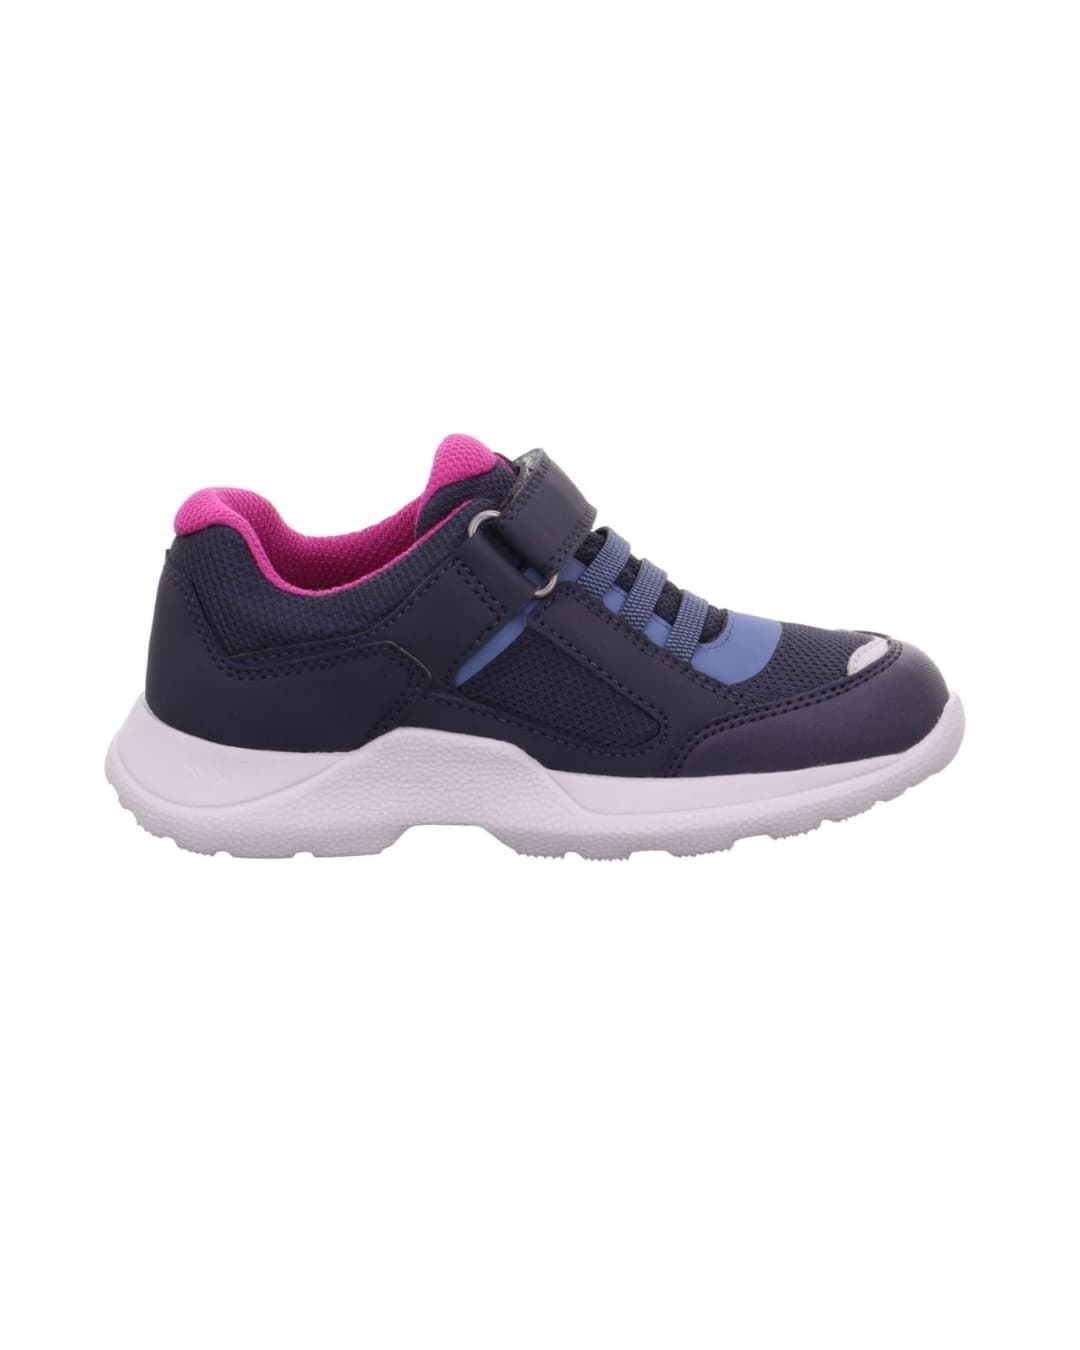 Superfit sneakers for girls Gore-tex Navy Blue - Image 3